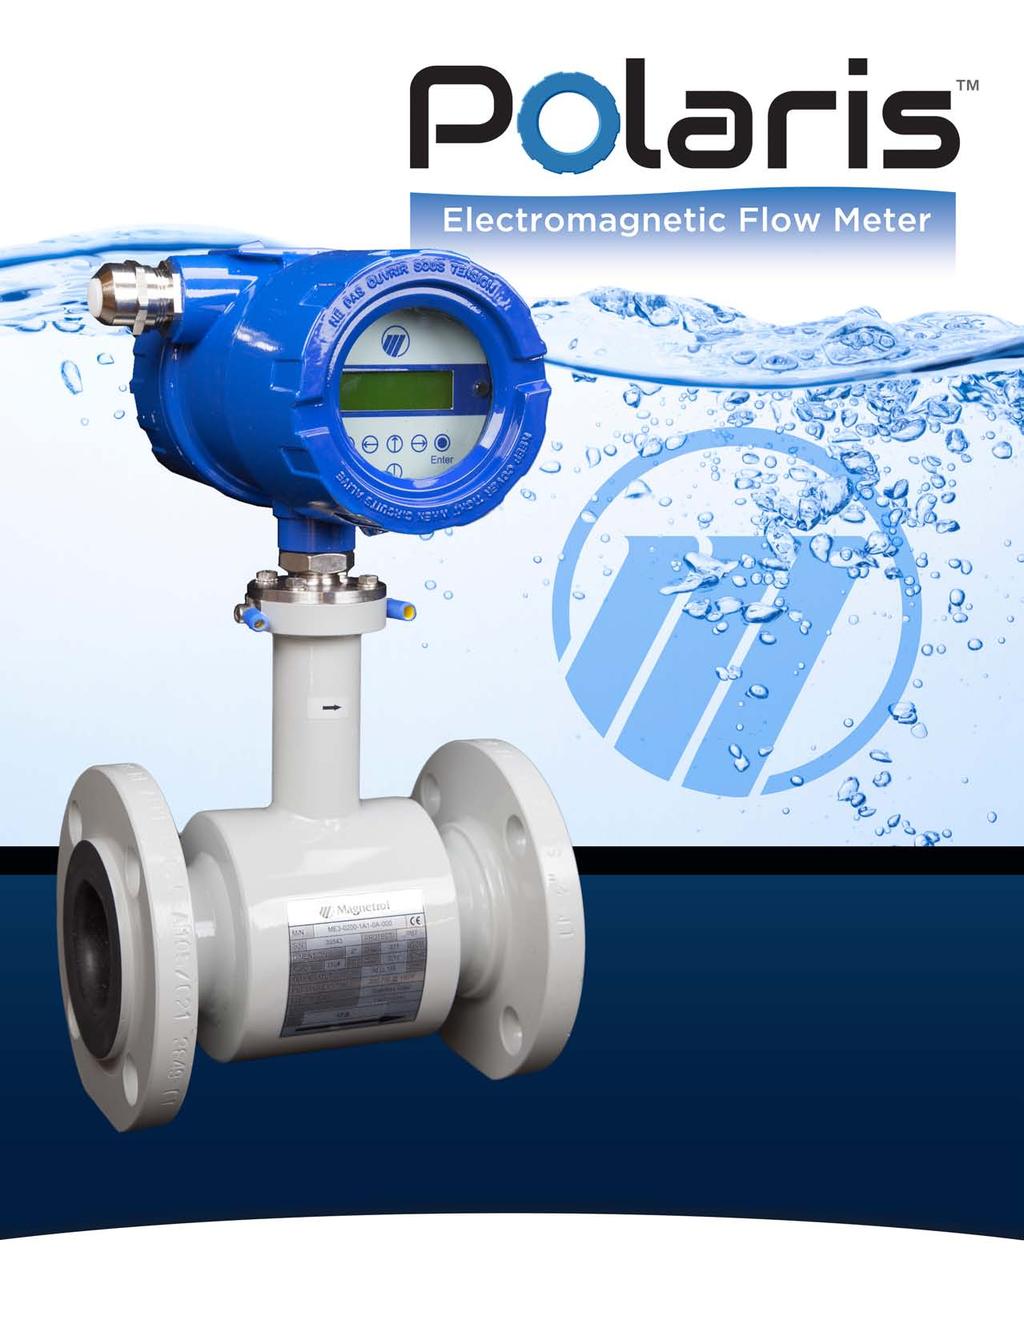 The Polaris MA1 is the first liquid flow meter offered by Magnetrol, expanding the already